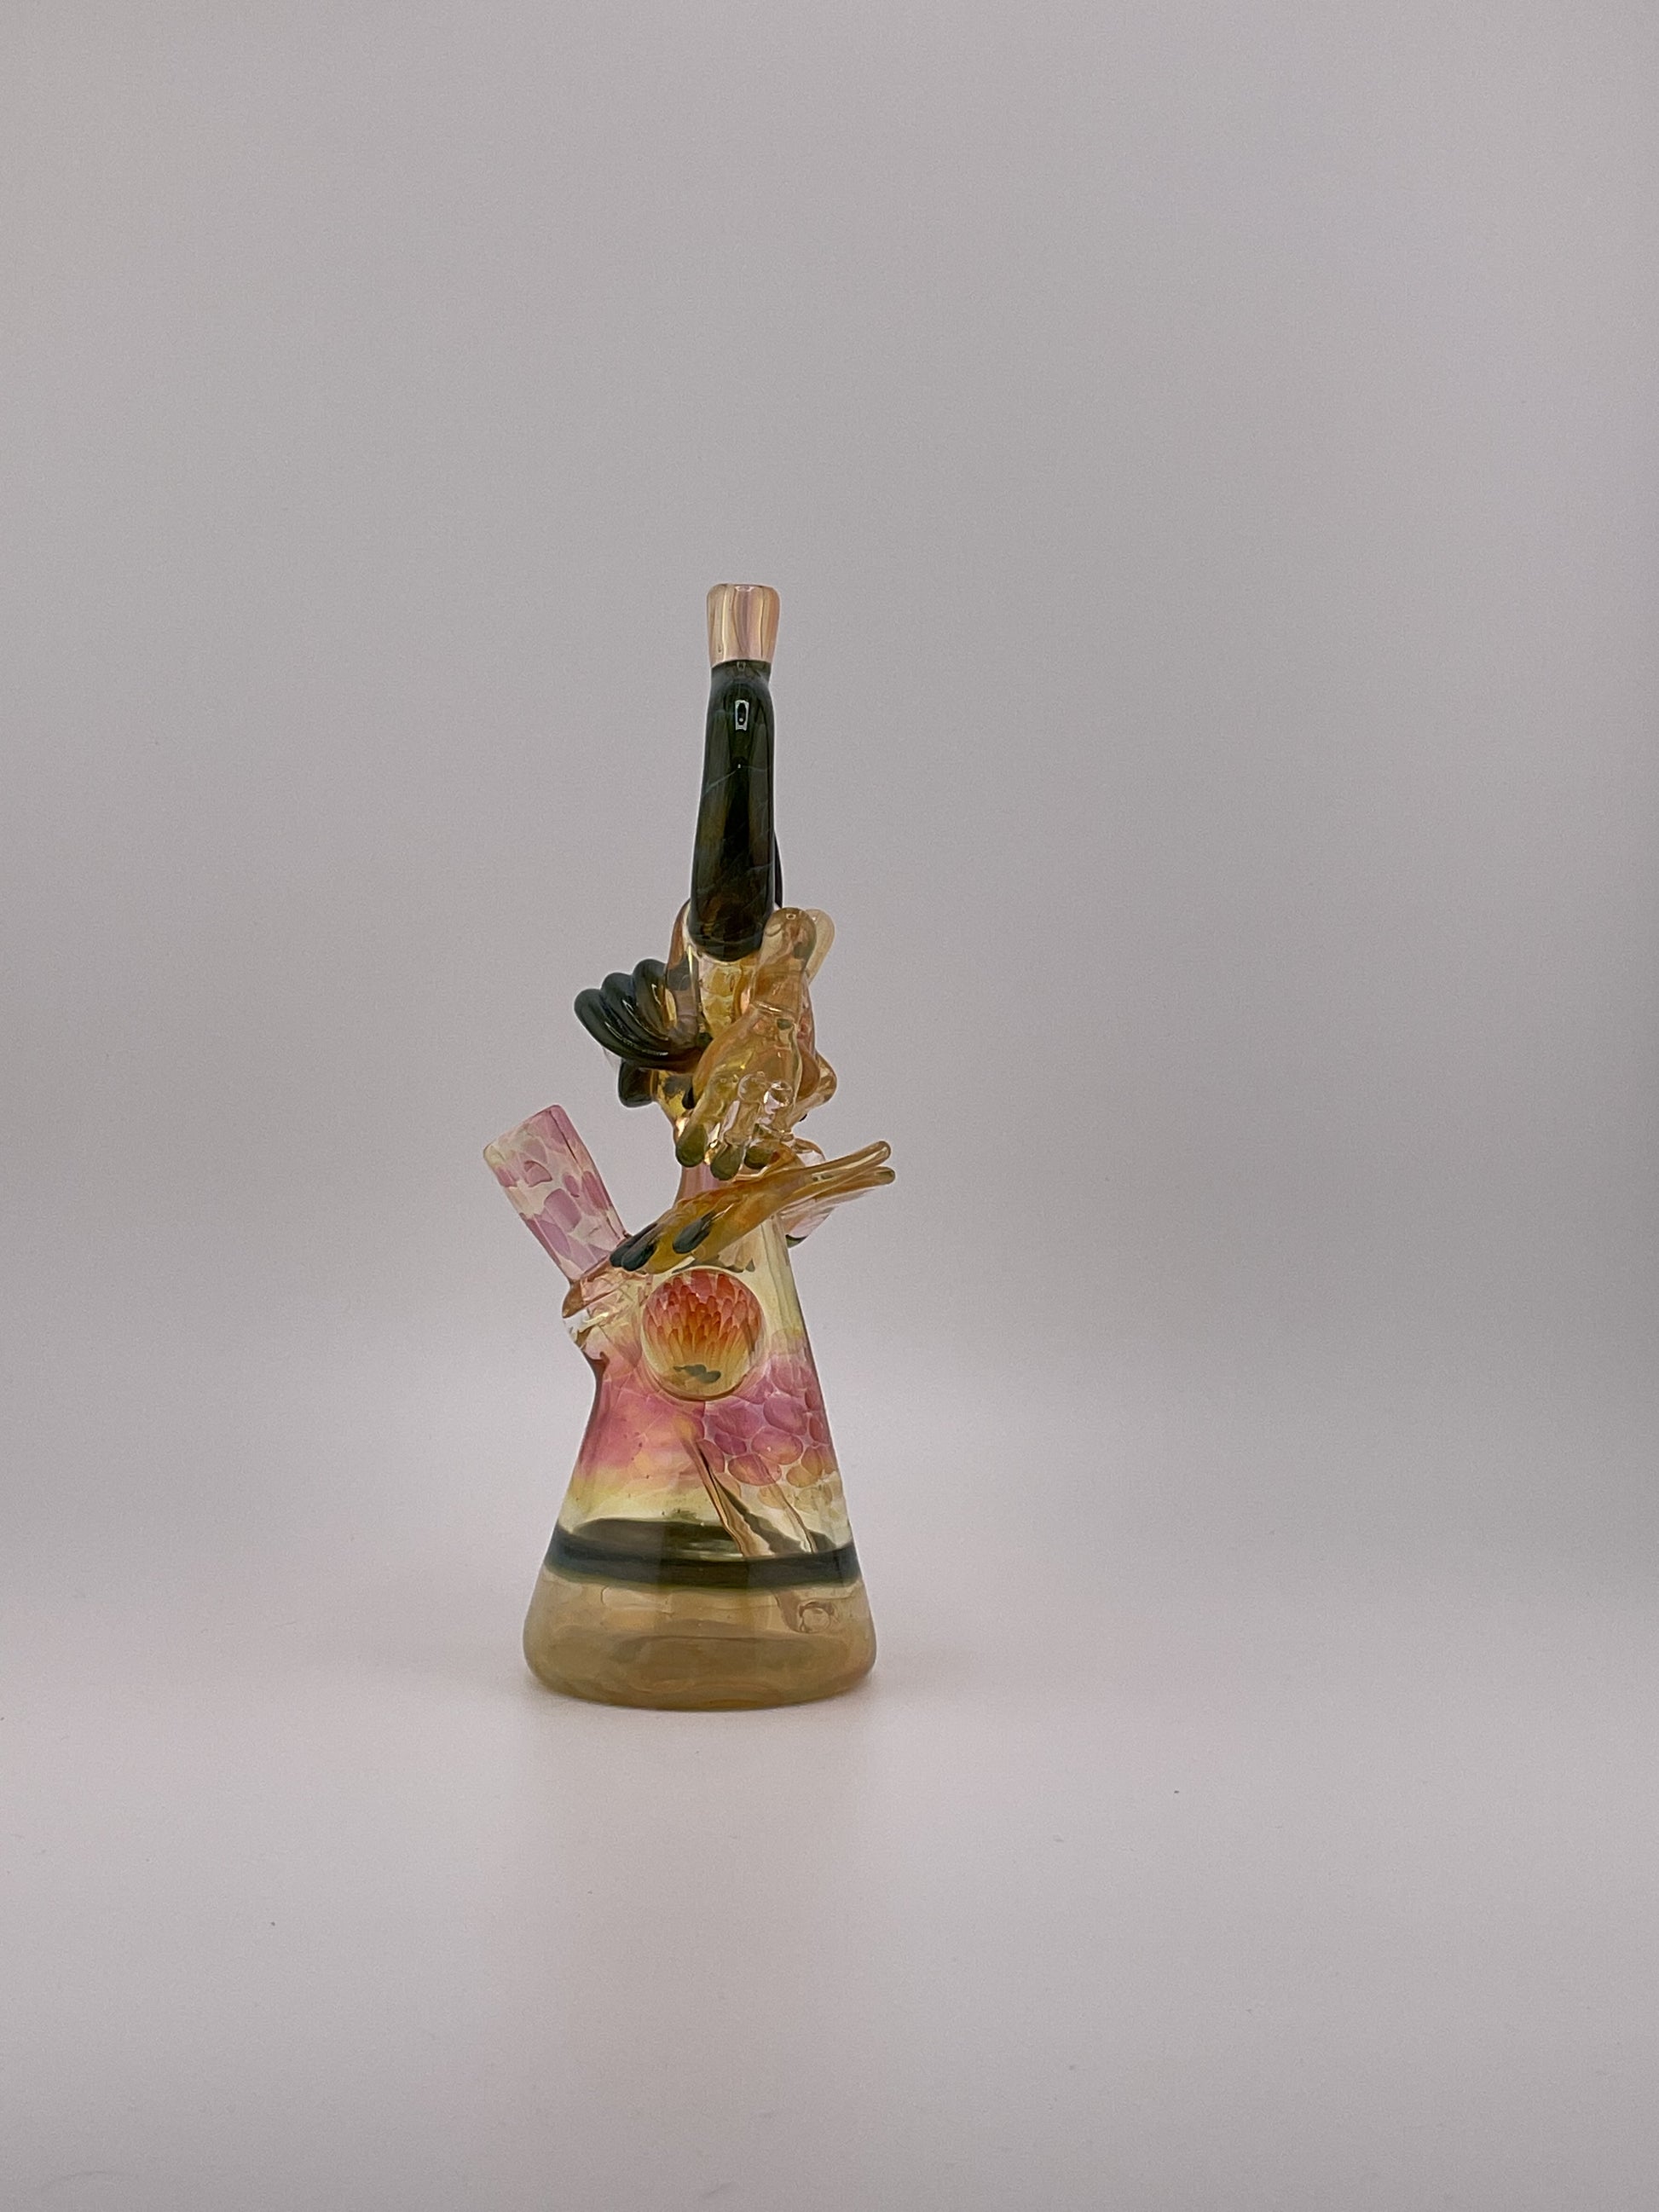 Fumed Jacob jarvis warrior mini tube side view, green horns flower marble pink and yellow hues large eyball with fingernails and toes